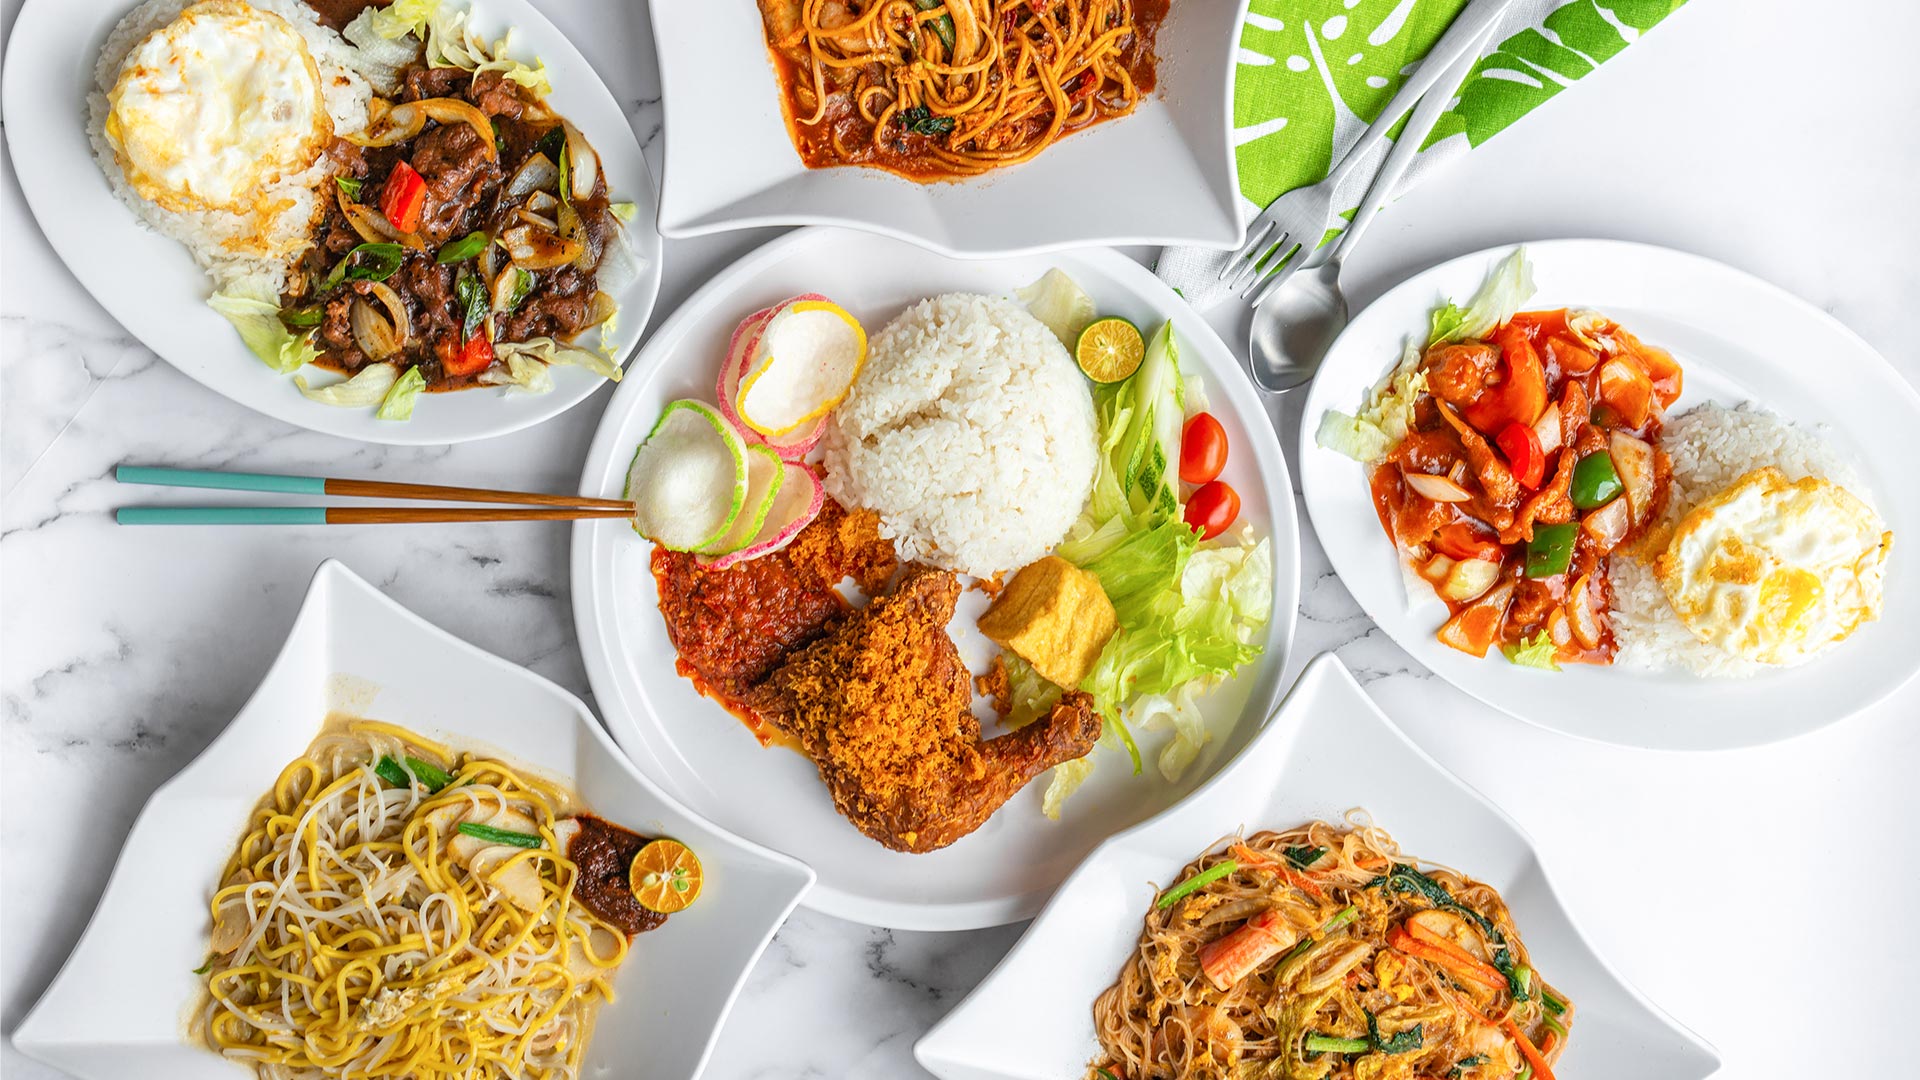 Nasi Lemak, Hokkien Mee and other local food to eat in Singapore